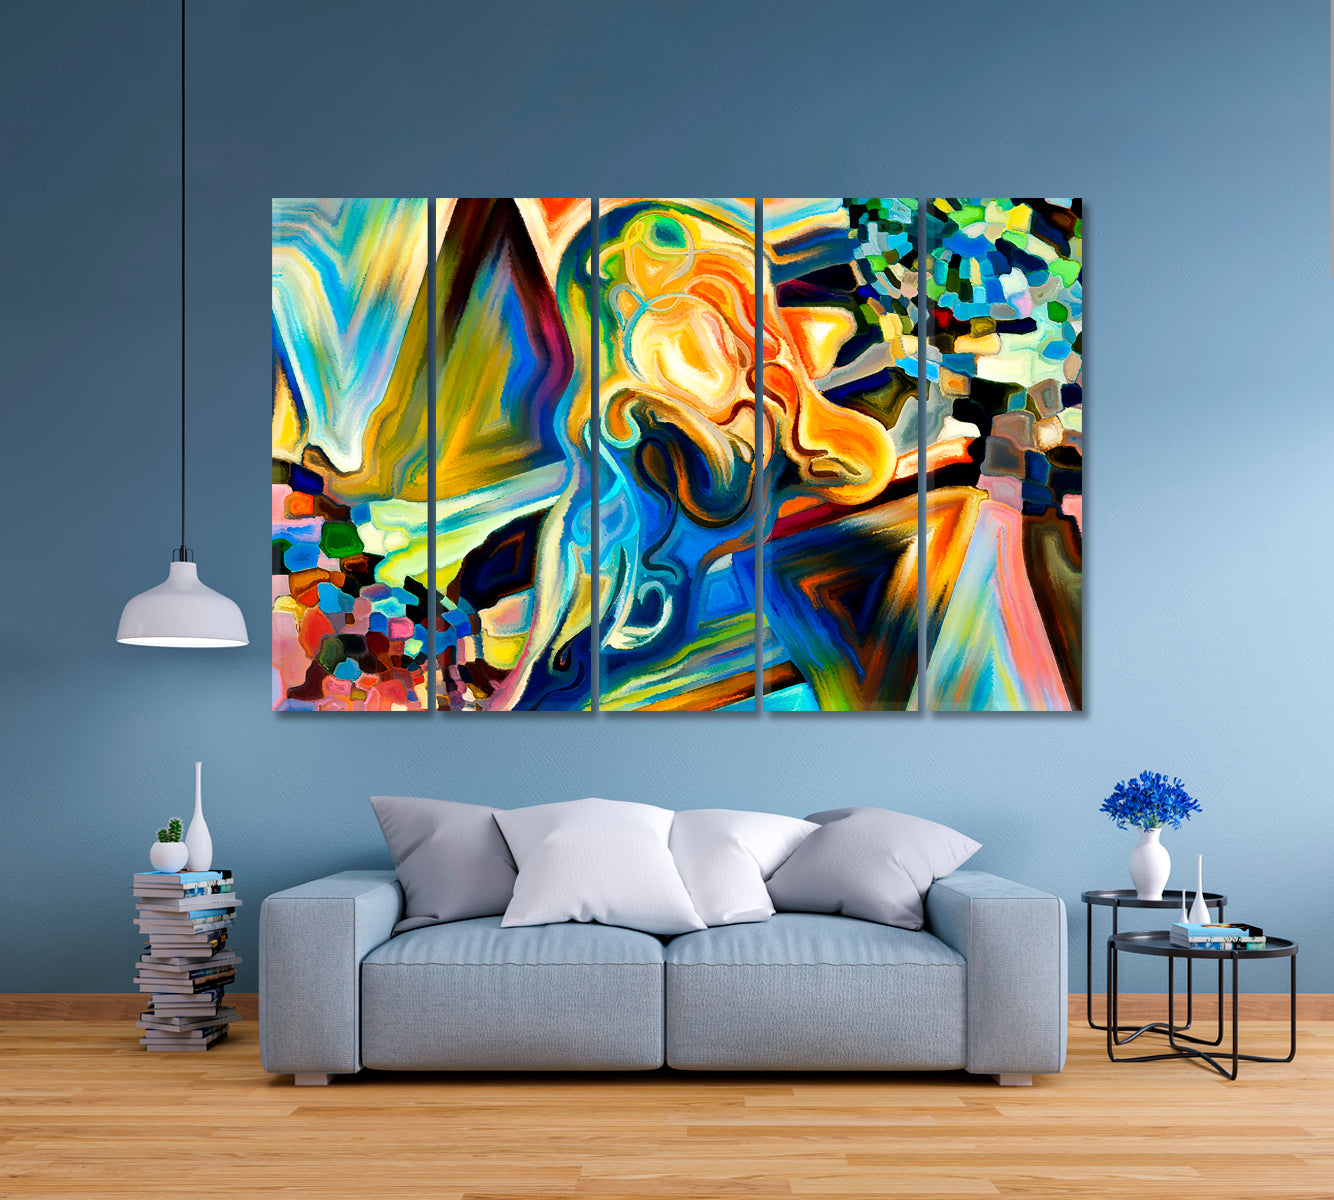 Human and Geometric Forms Collection Abstract Colorful Allegory Contemporary Art Artesty 5 panels 36" x 24" 